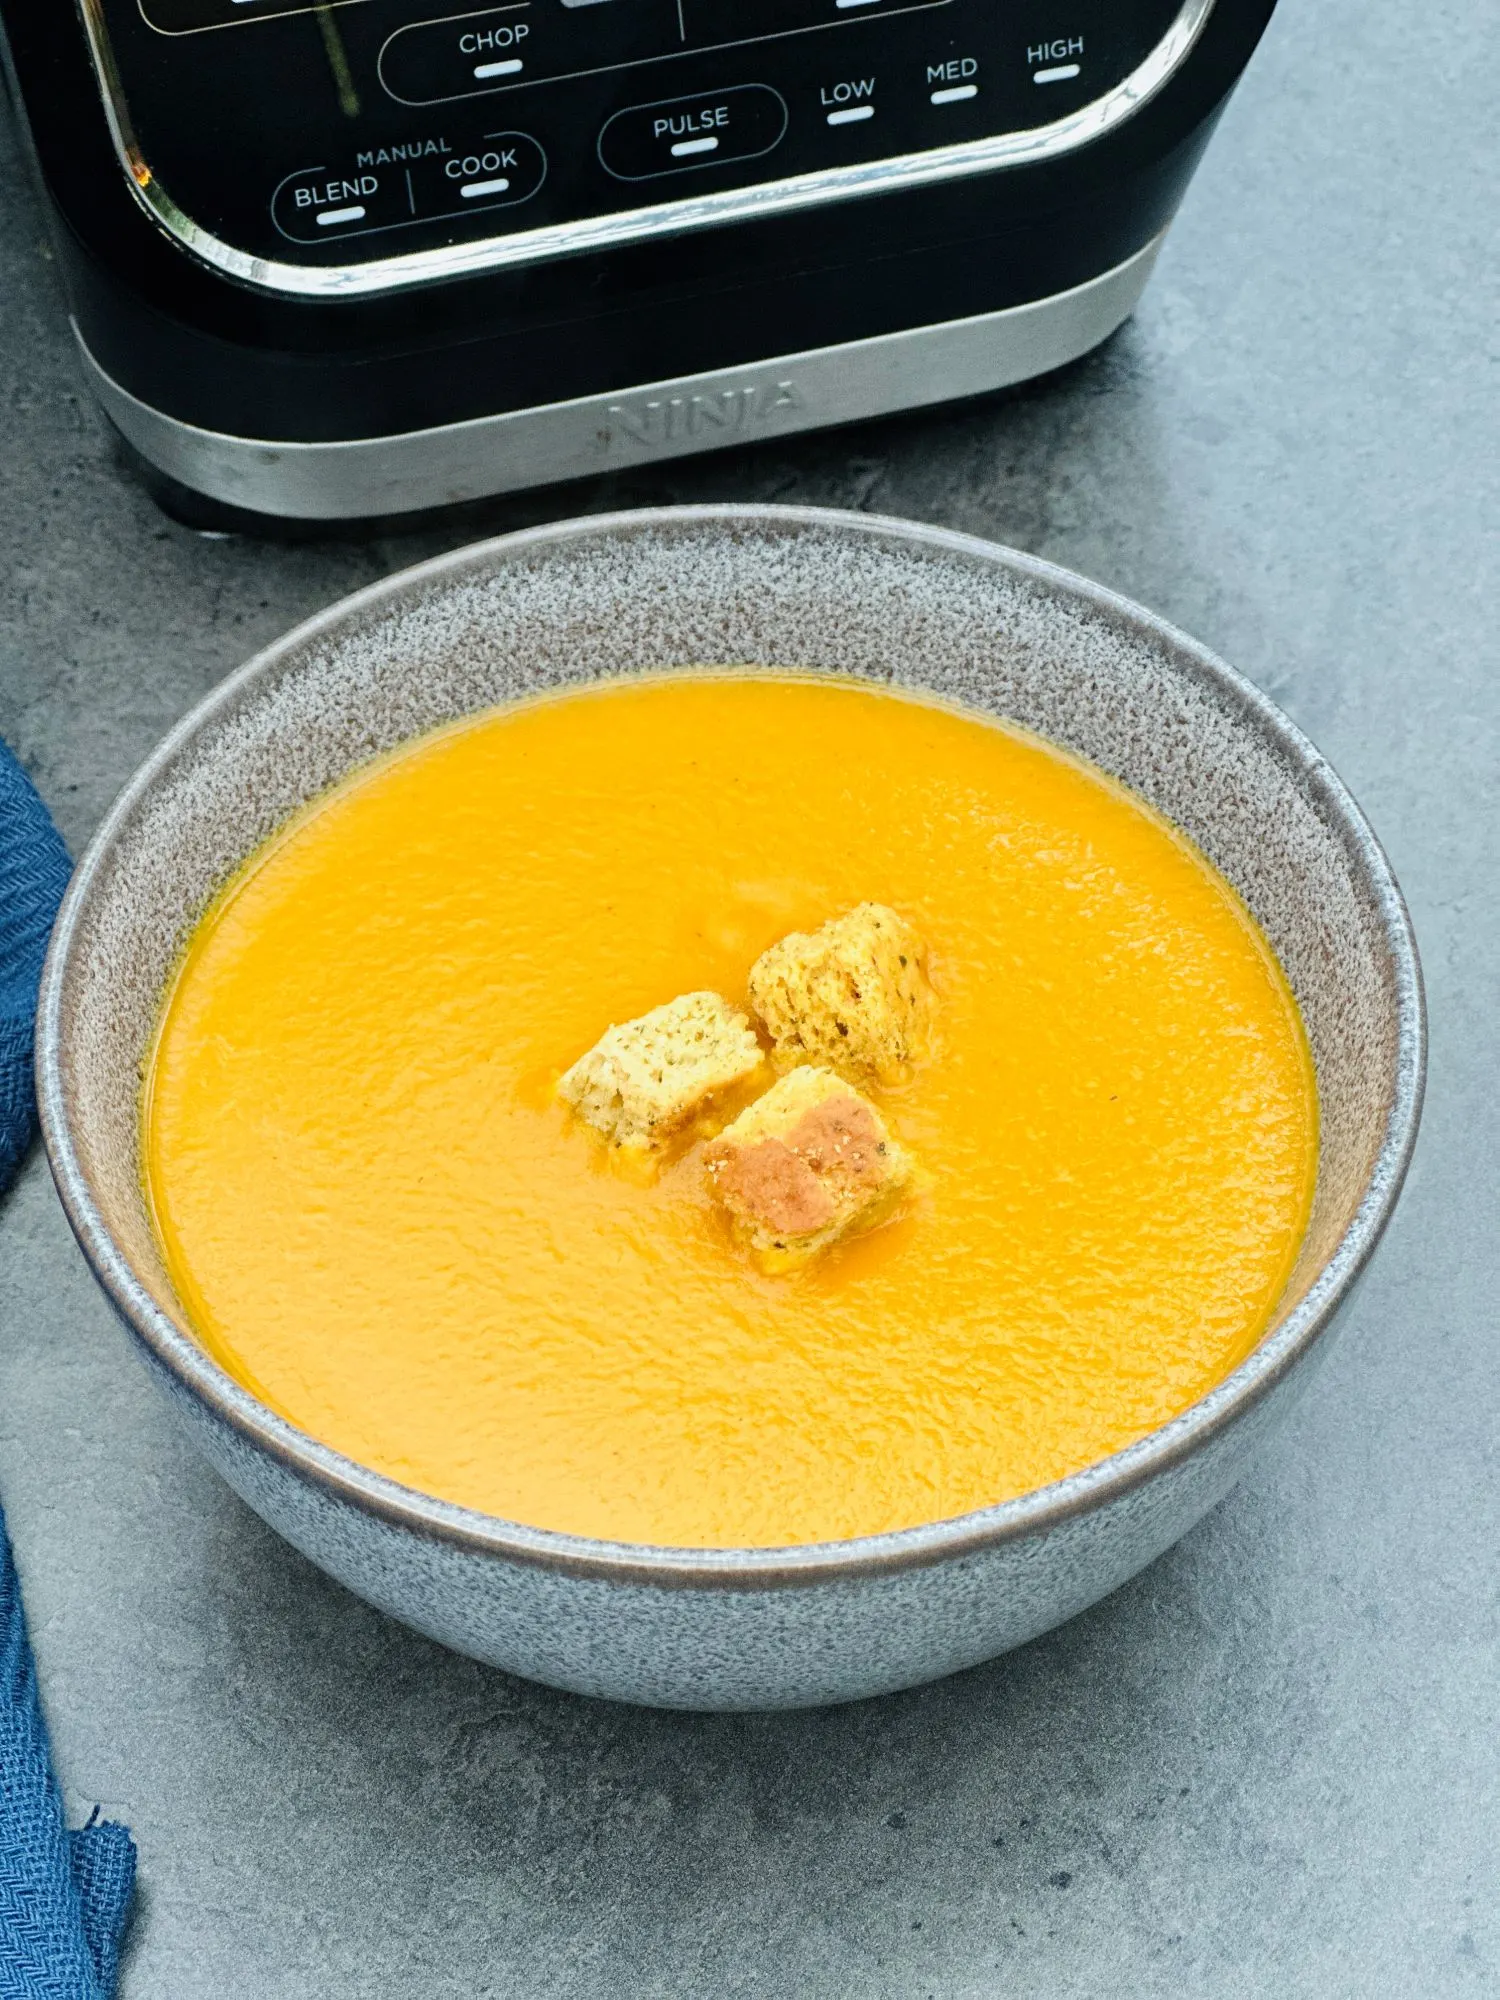 curried carrot soup next to a Ninja soup maker